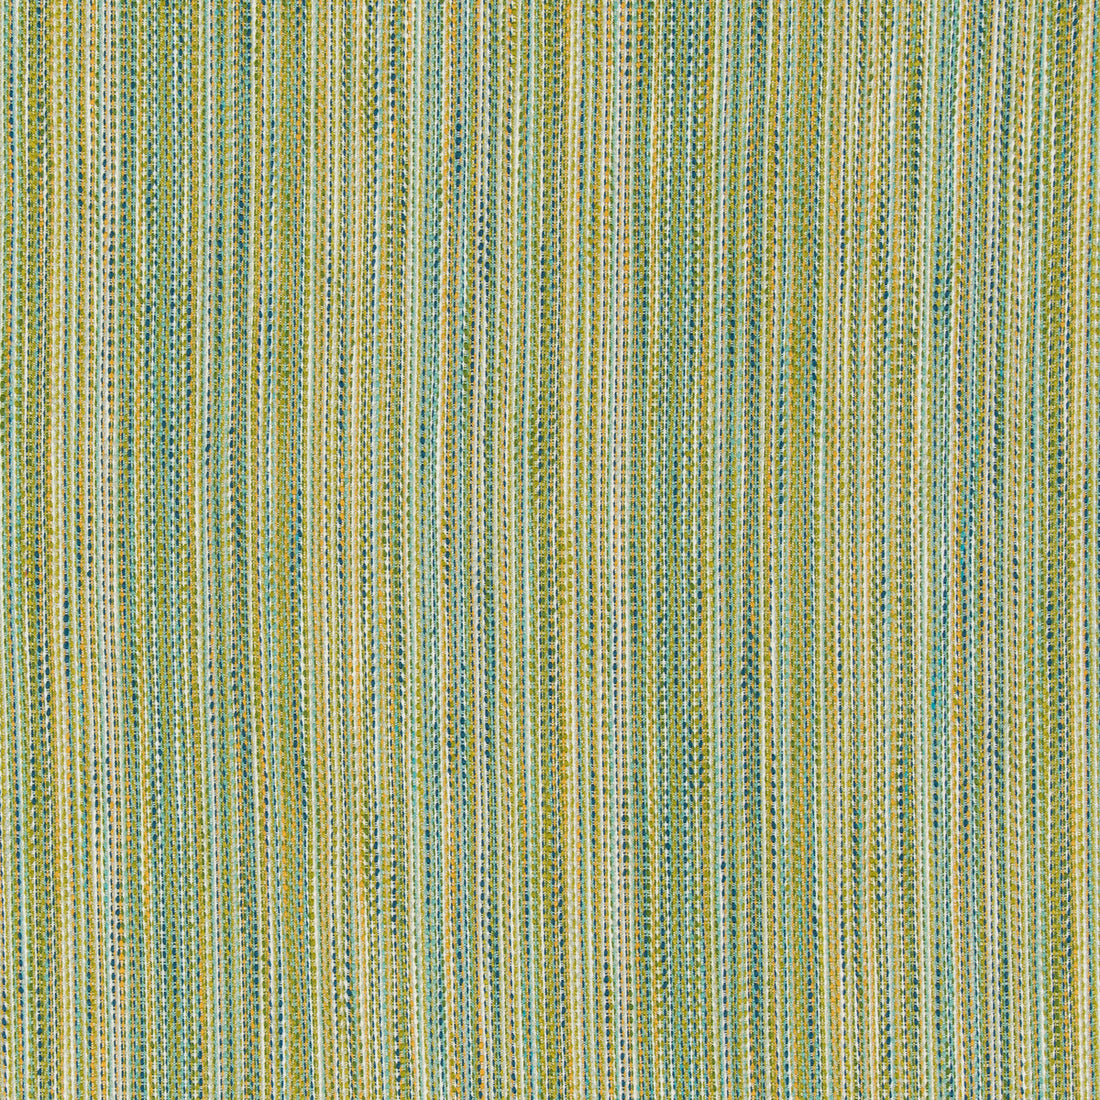 Kravet Design fabric in 36077-315 color - pattern 36077.315.0 - by Kravet Design in the Inside Out Performance Fabrics collection